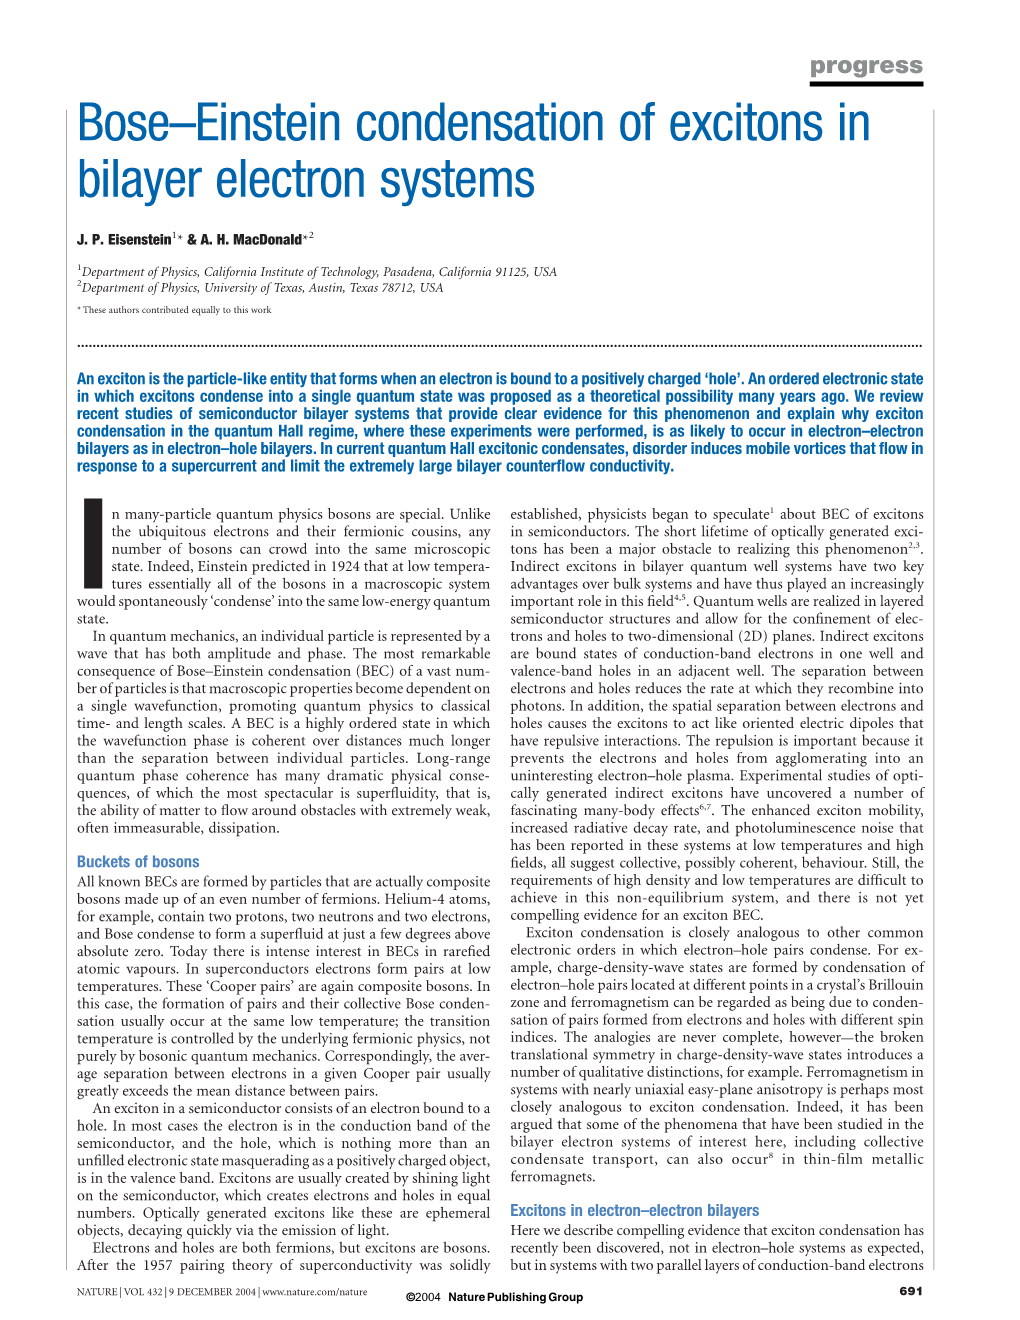 Bose–Einstein Condensation of Excitons in Bilayer Electron Systems